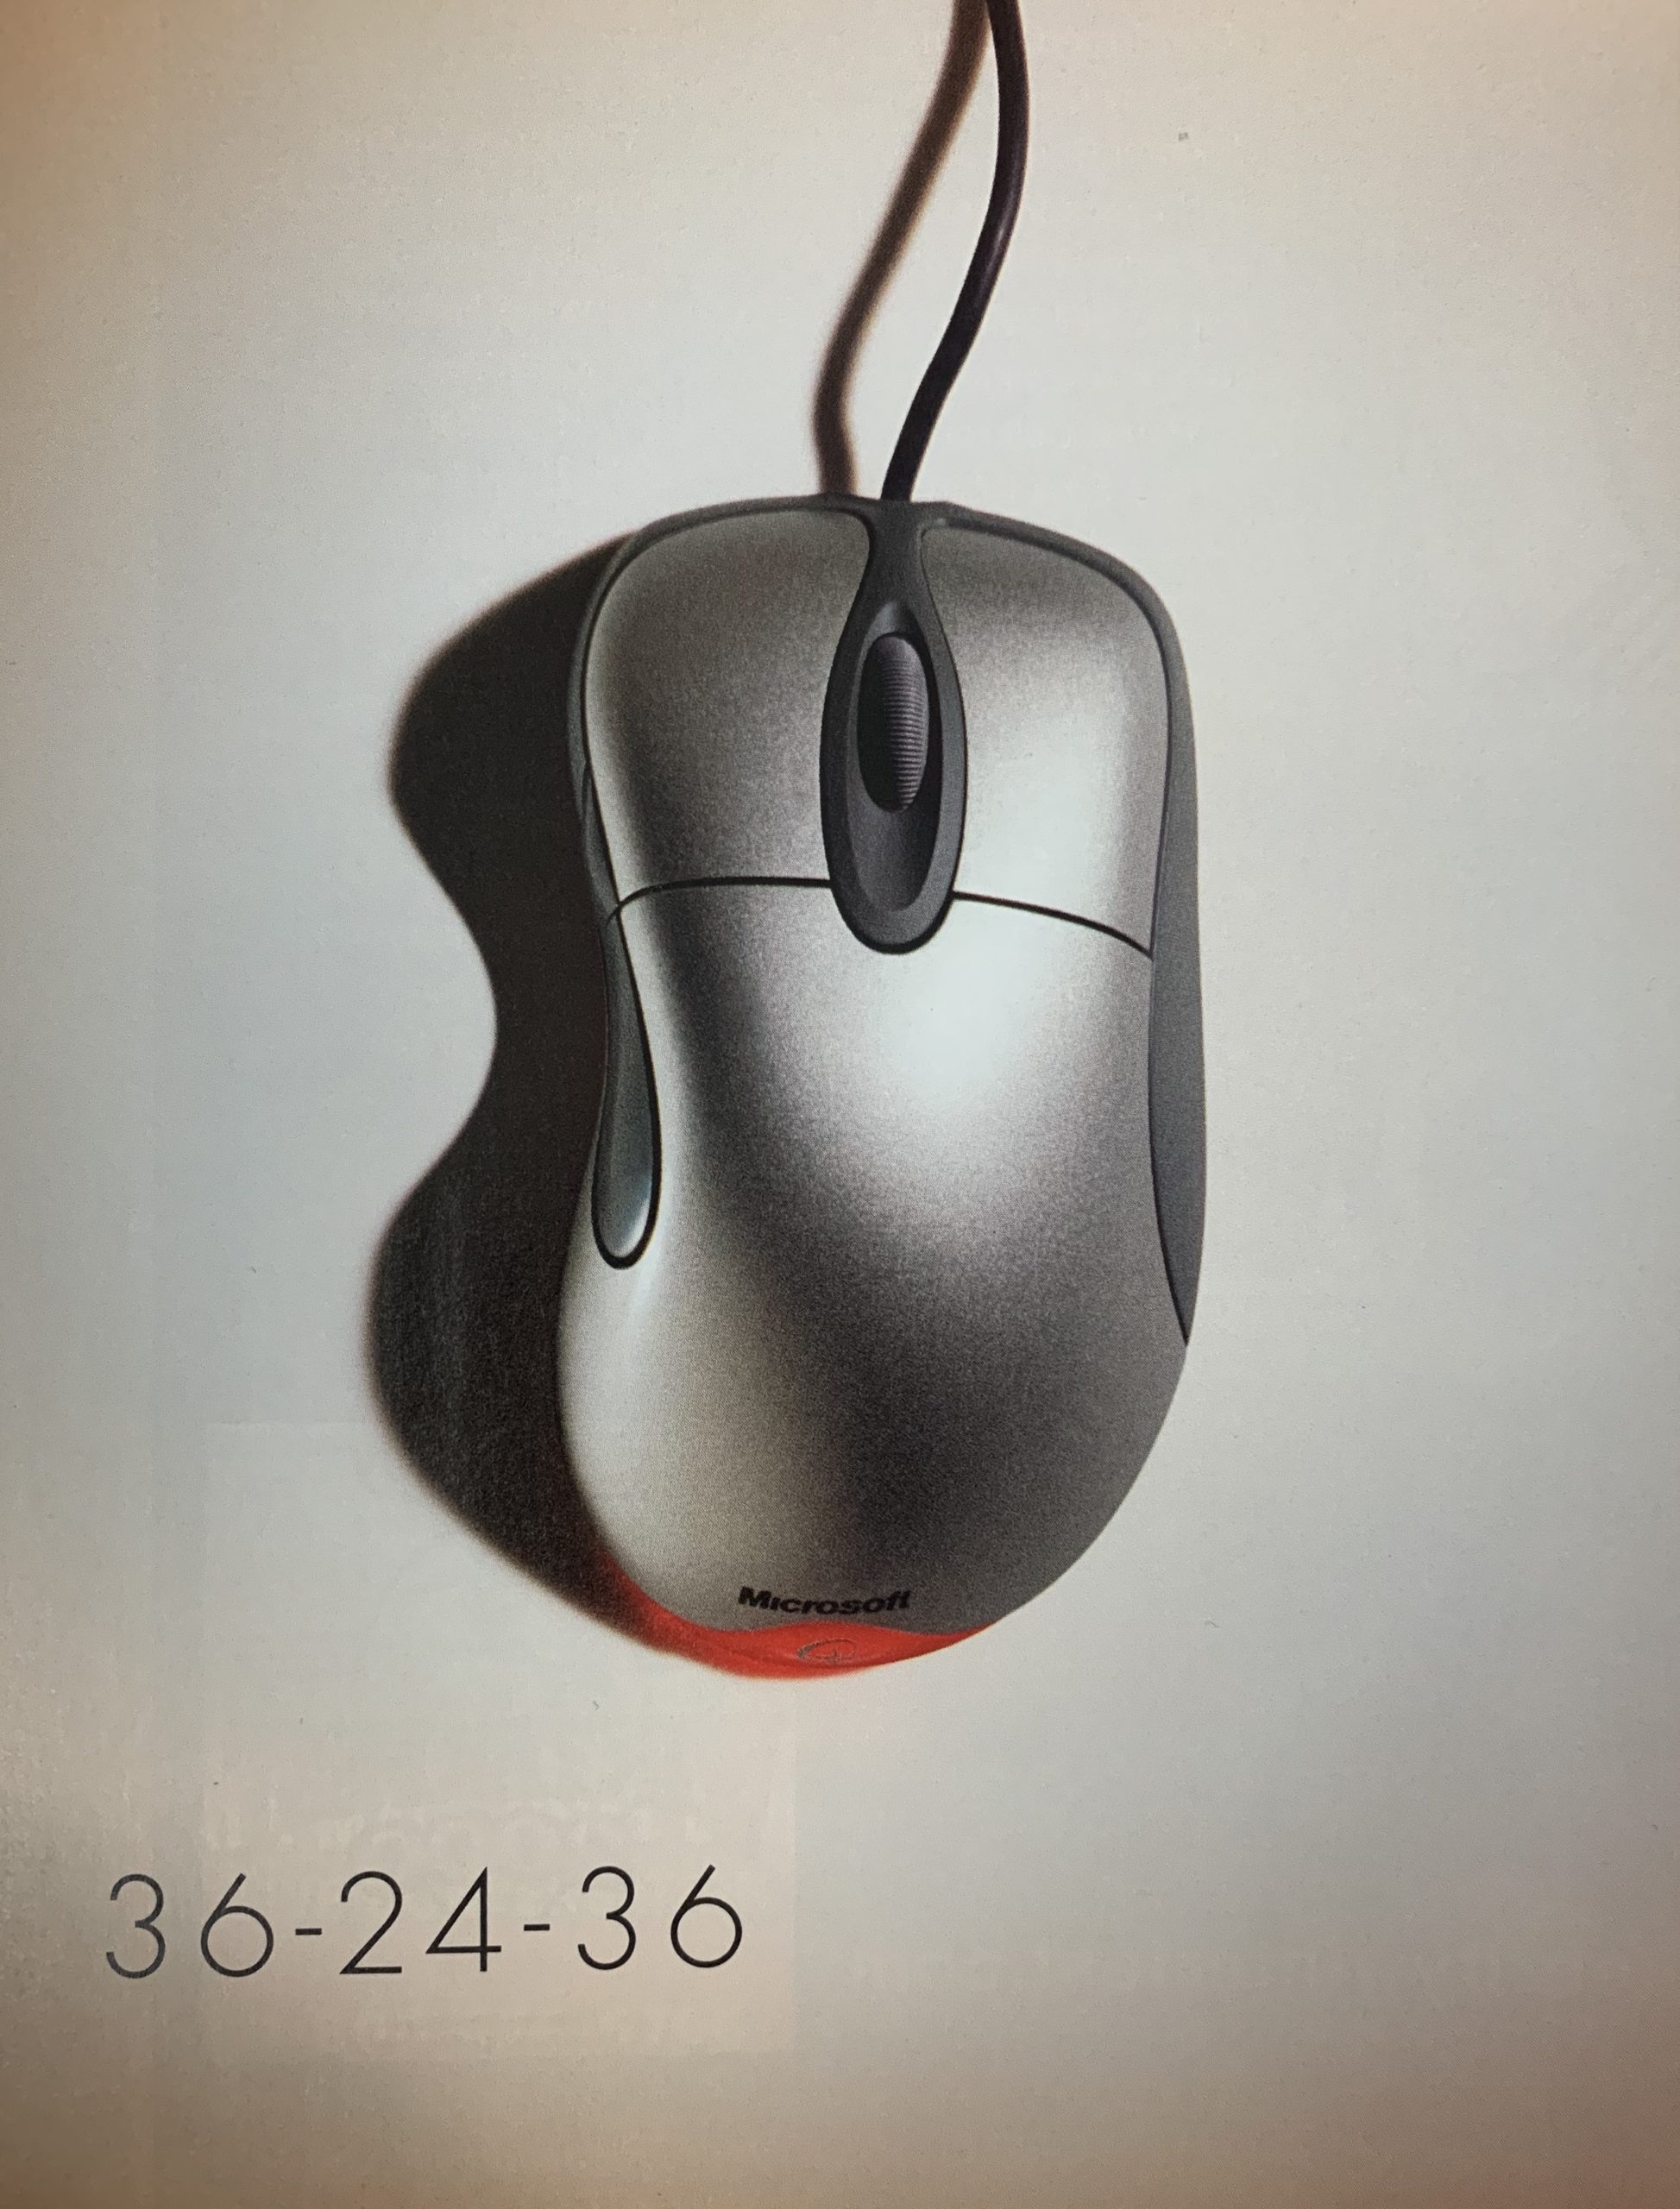 ‘36-24-36’ mouse ad